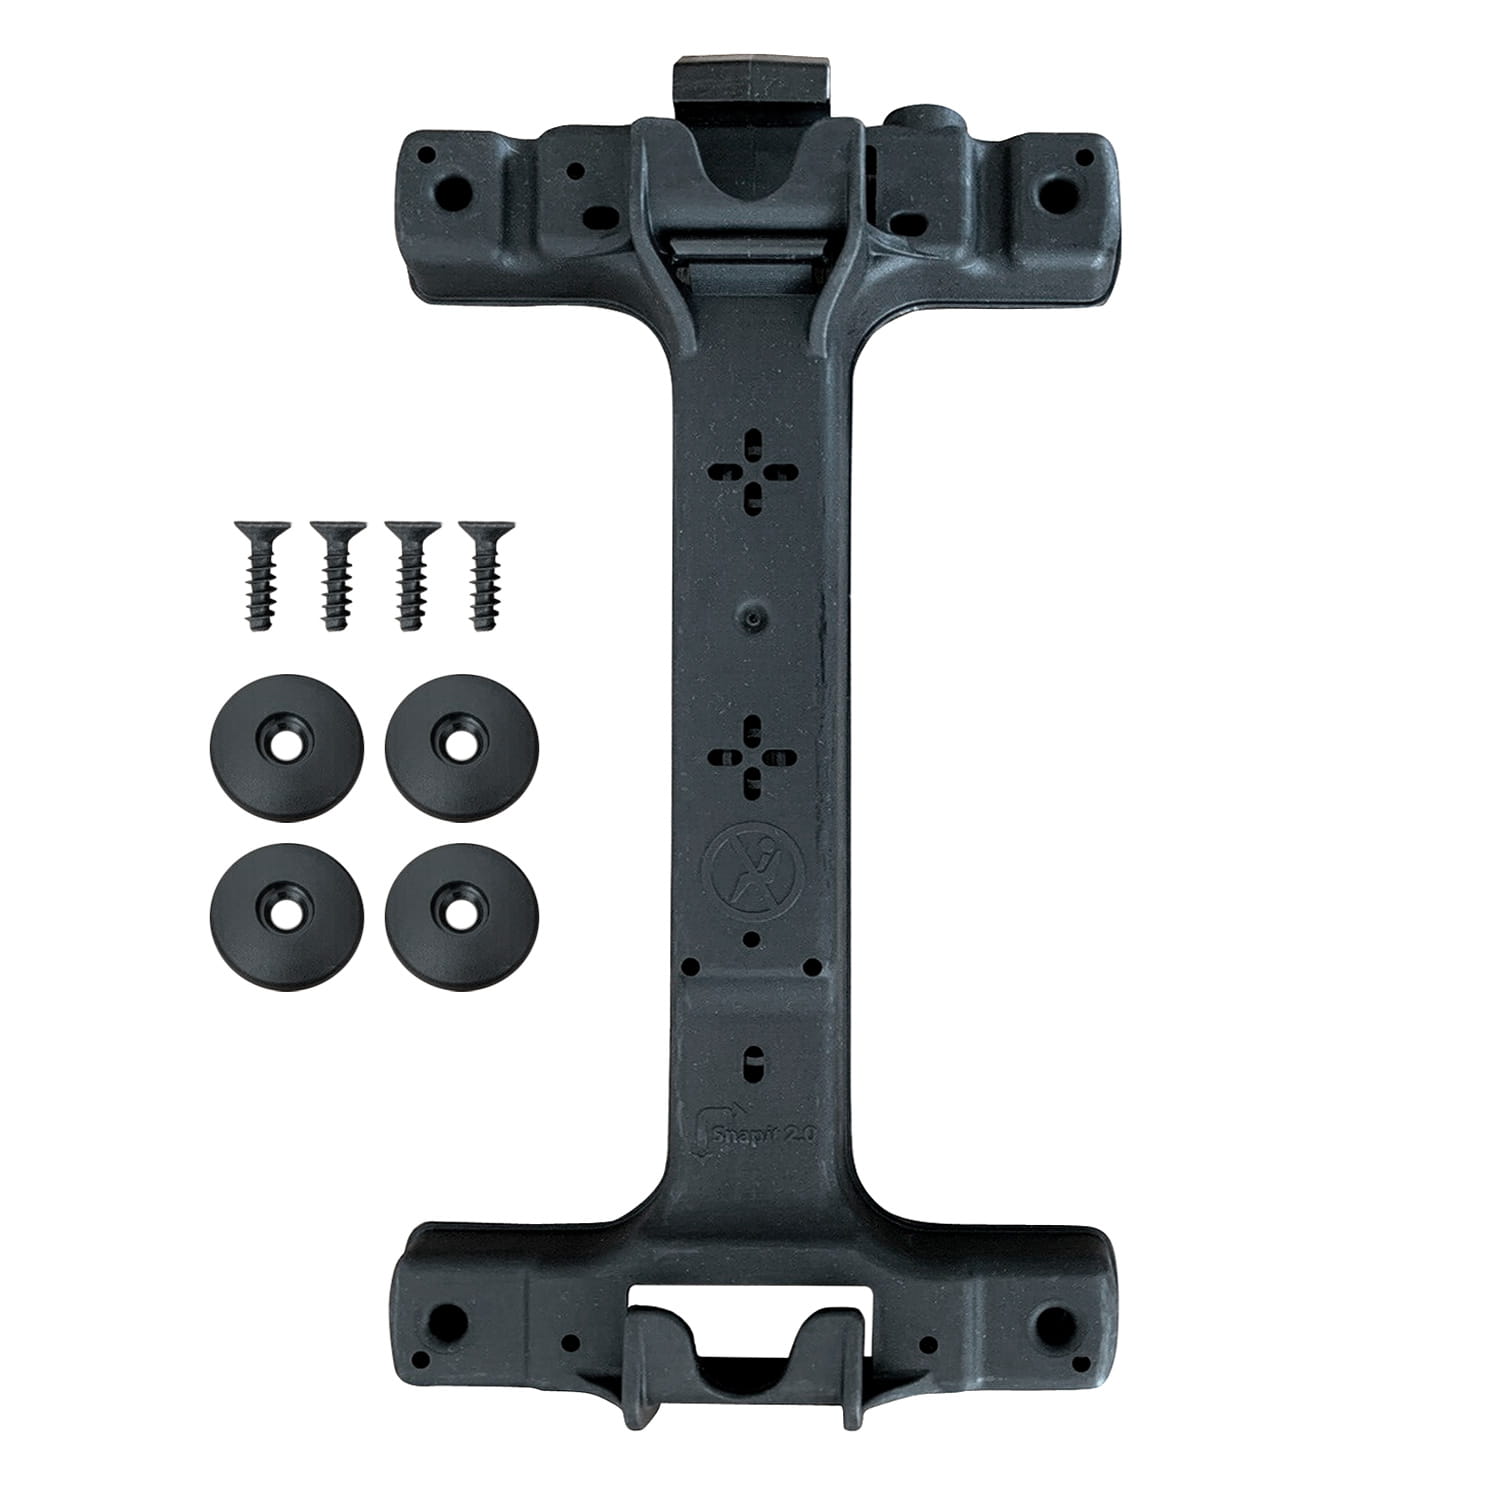 Racktime SNAPIT 2.0 Adapter Plate for Racktime Rack